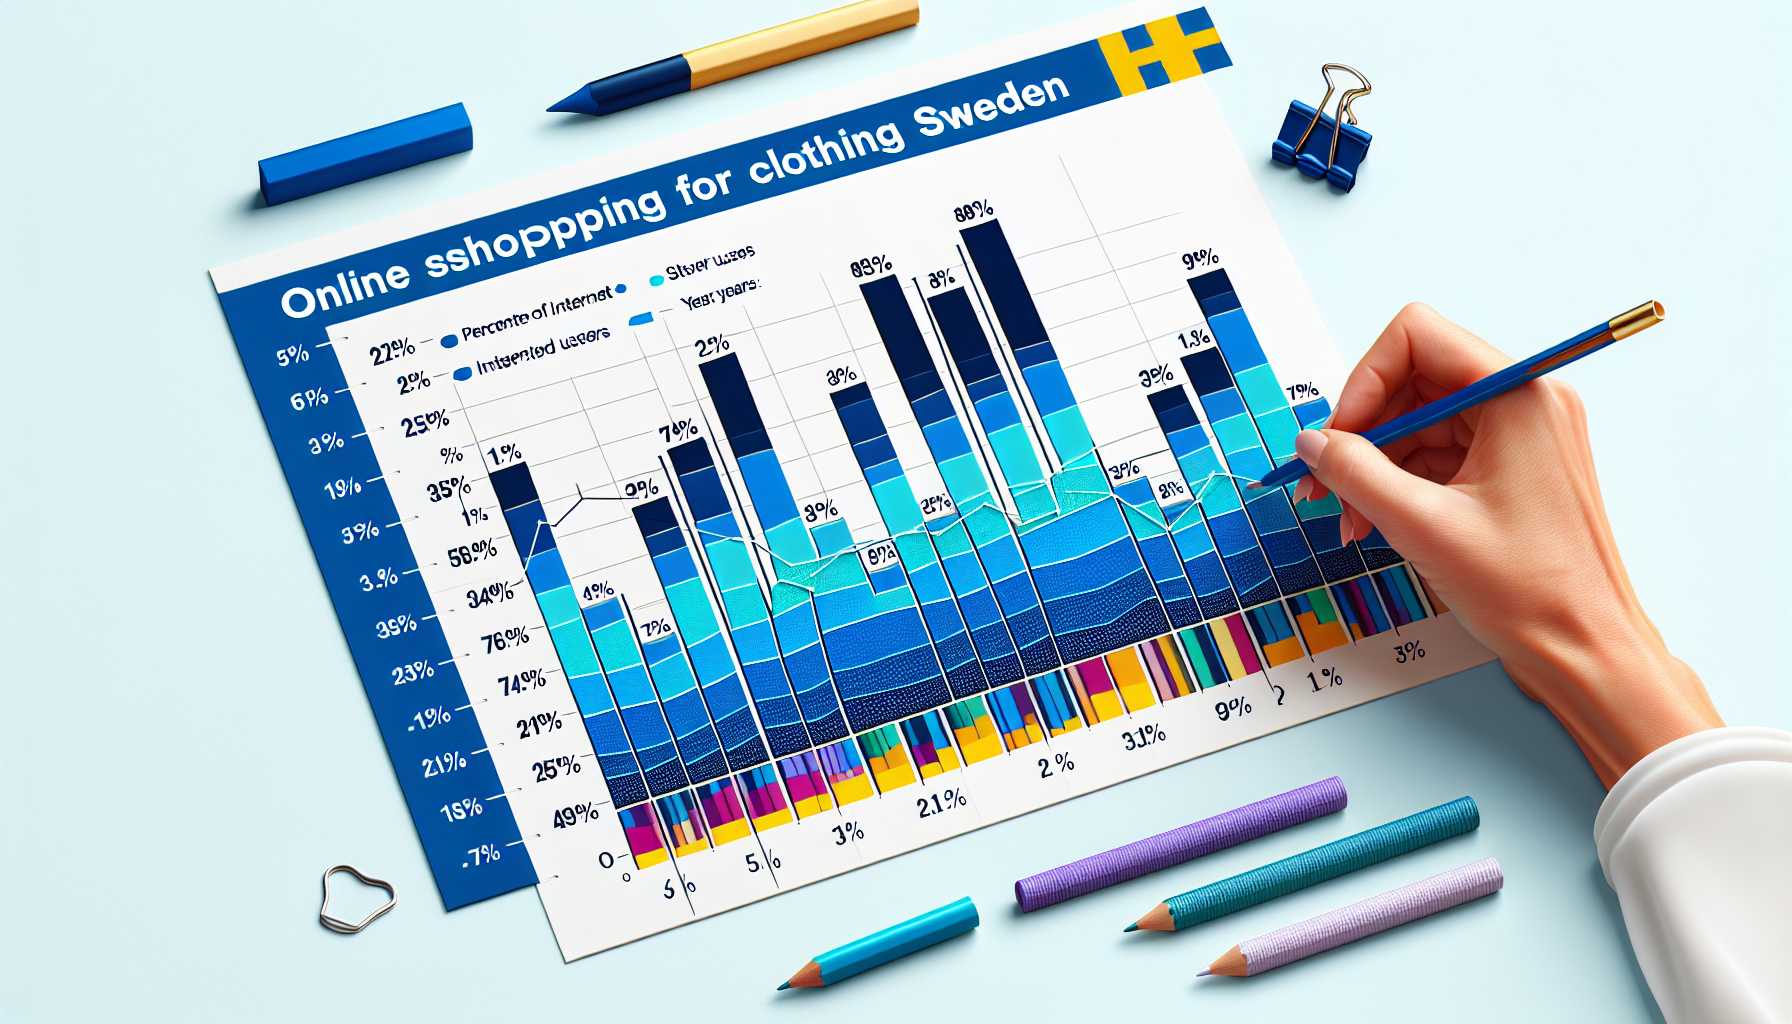 Graph showing the percentage of internet users in Sweden who shop online for clothing